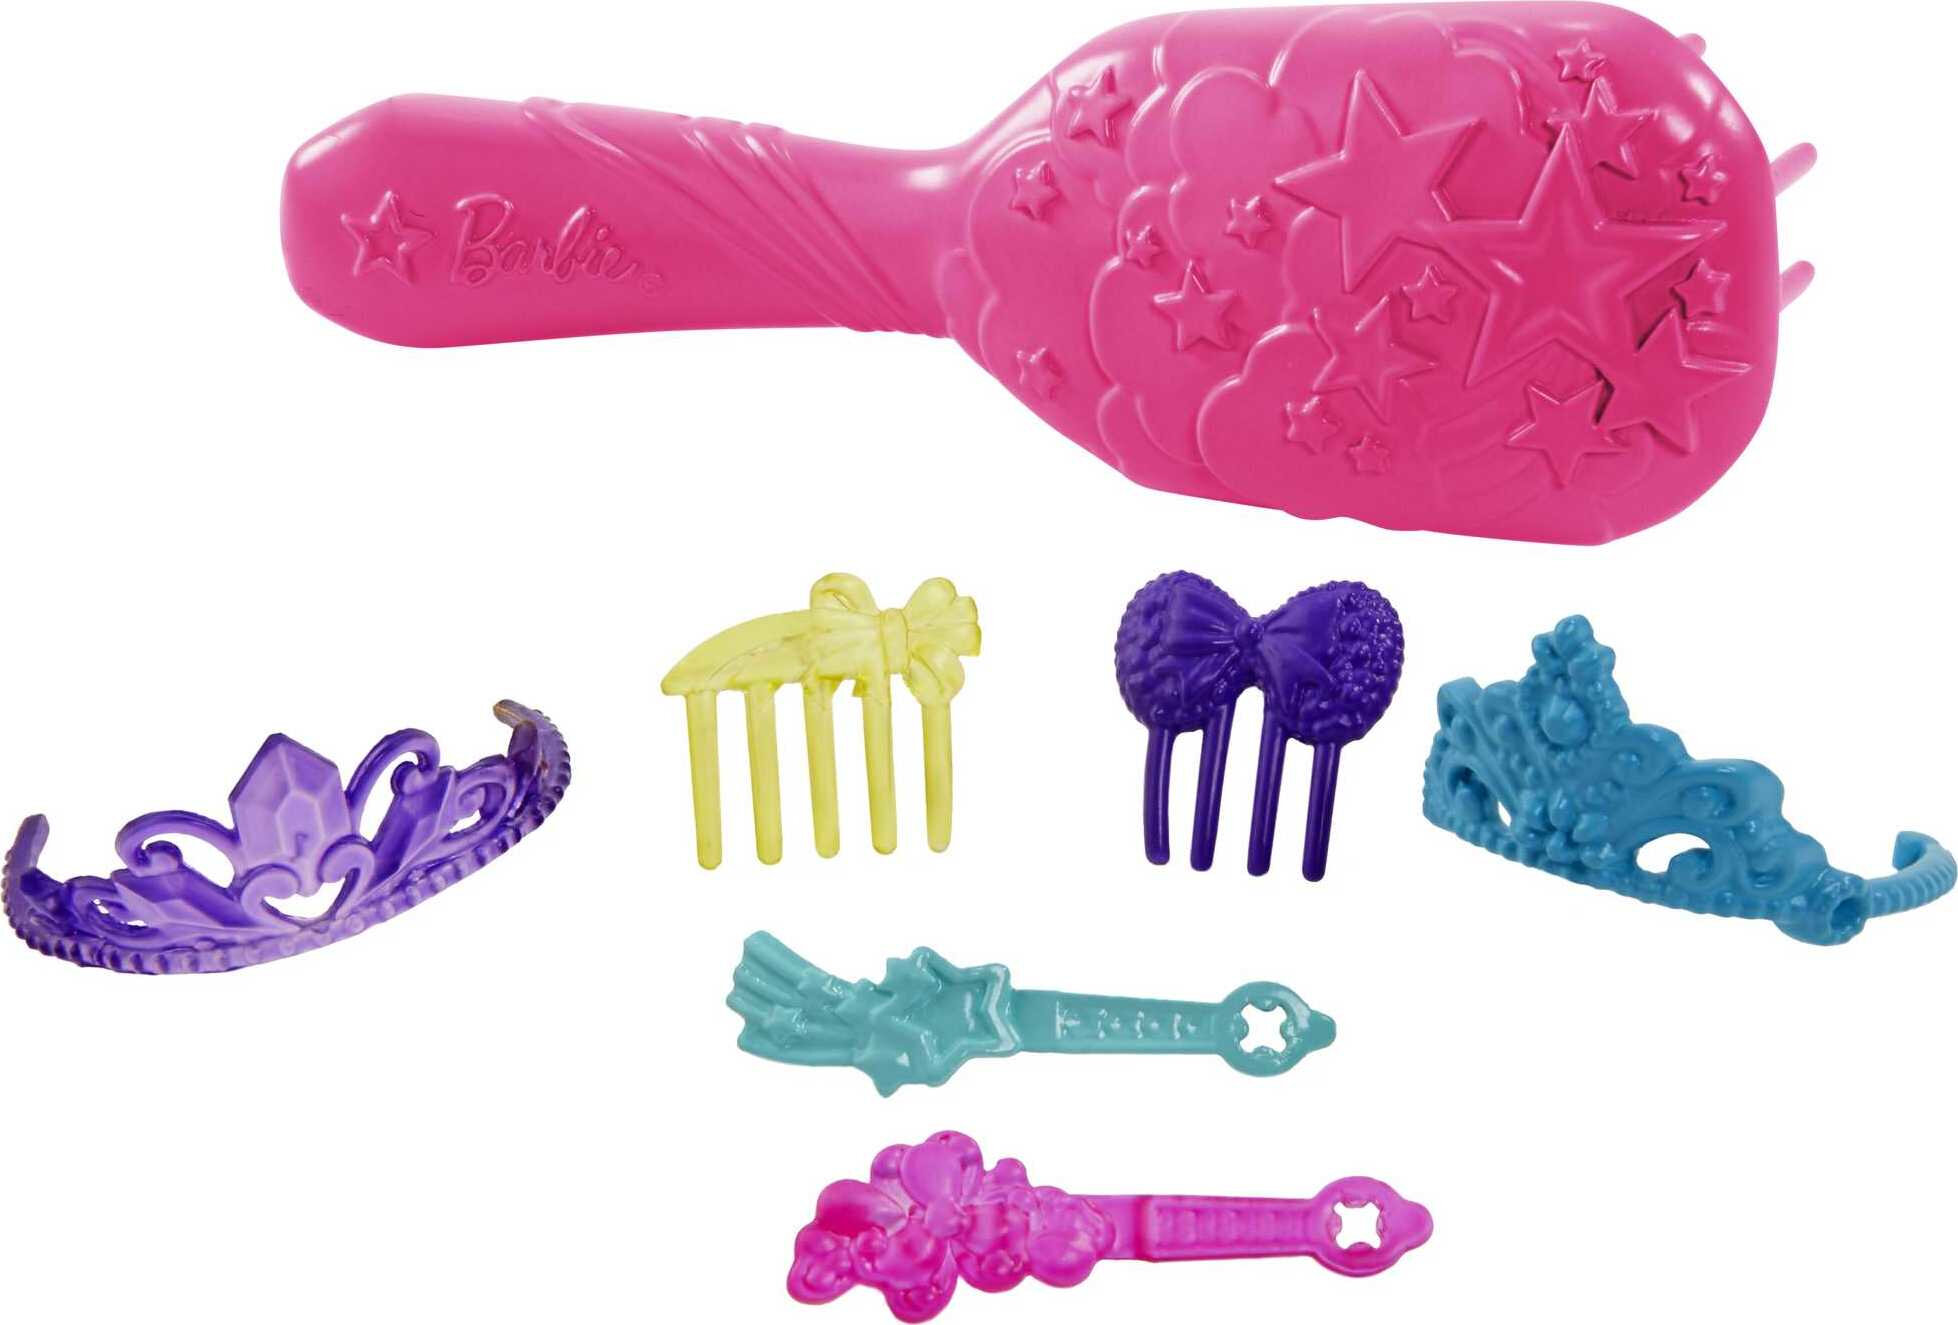 Barbie Dreamtopia Mermaid Doll with Extra-Long Fantasy Hair and Styling Accessories - image 5 of 6